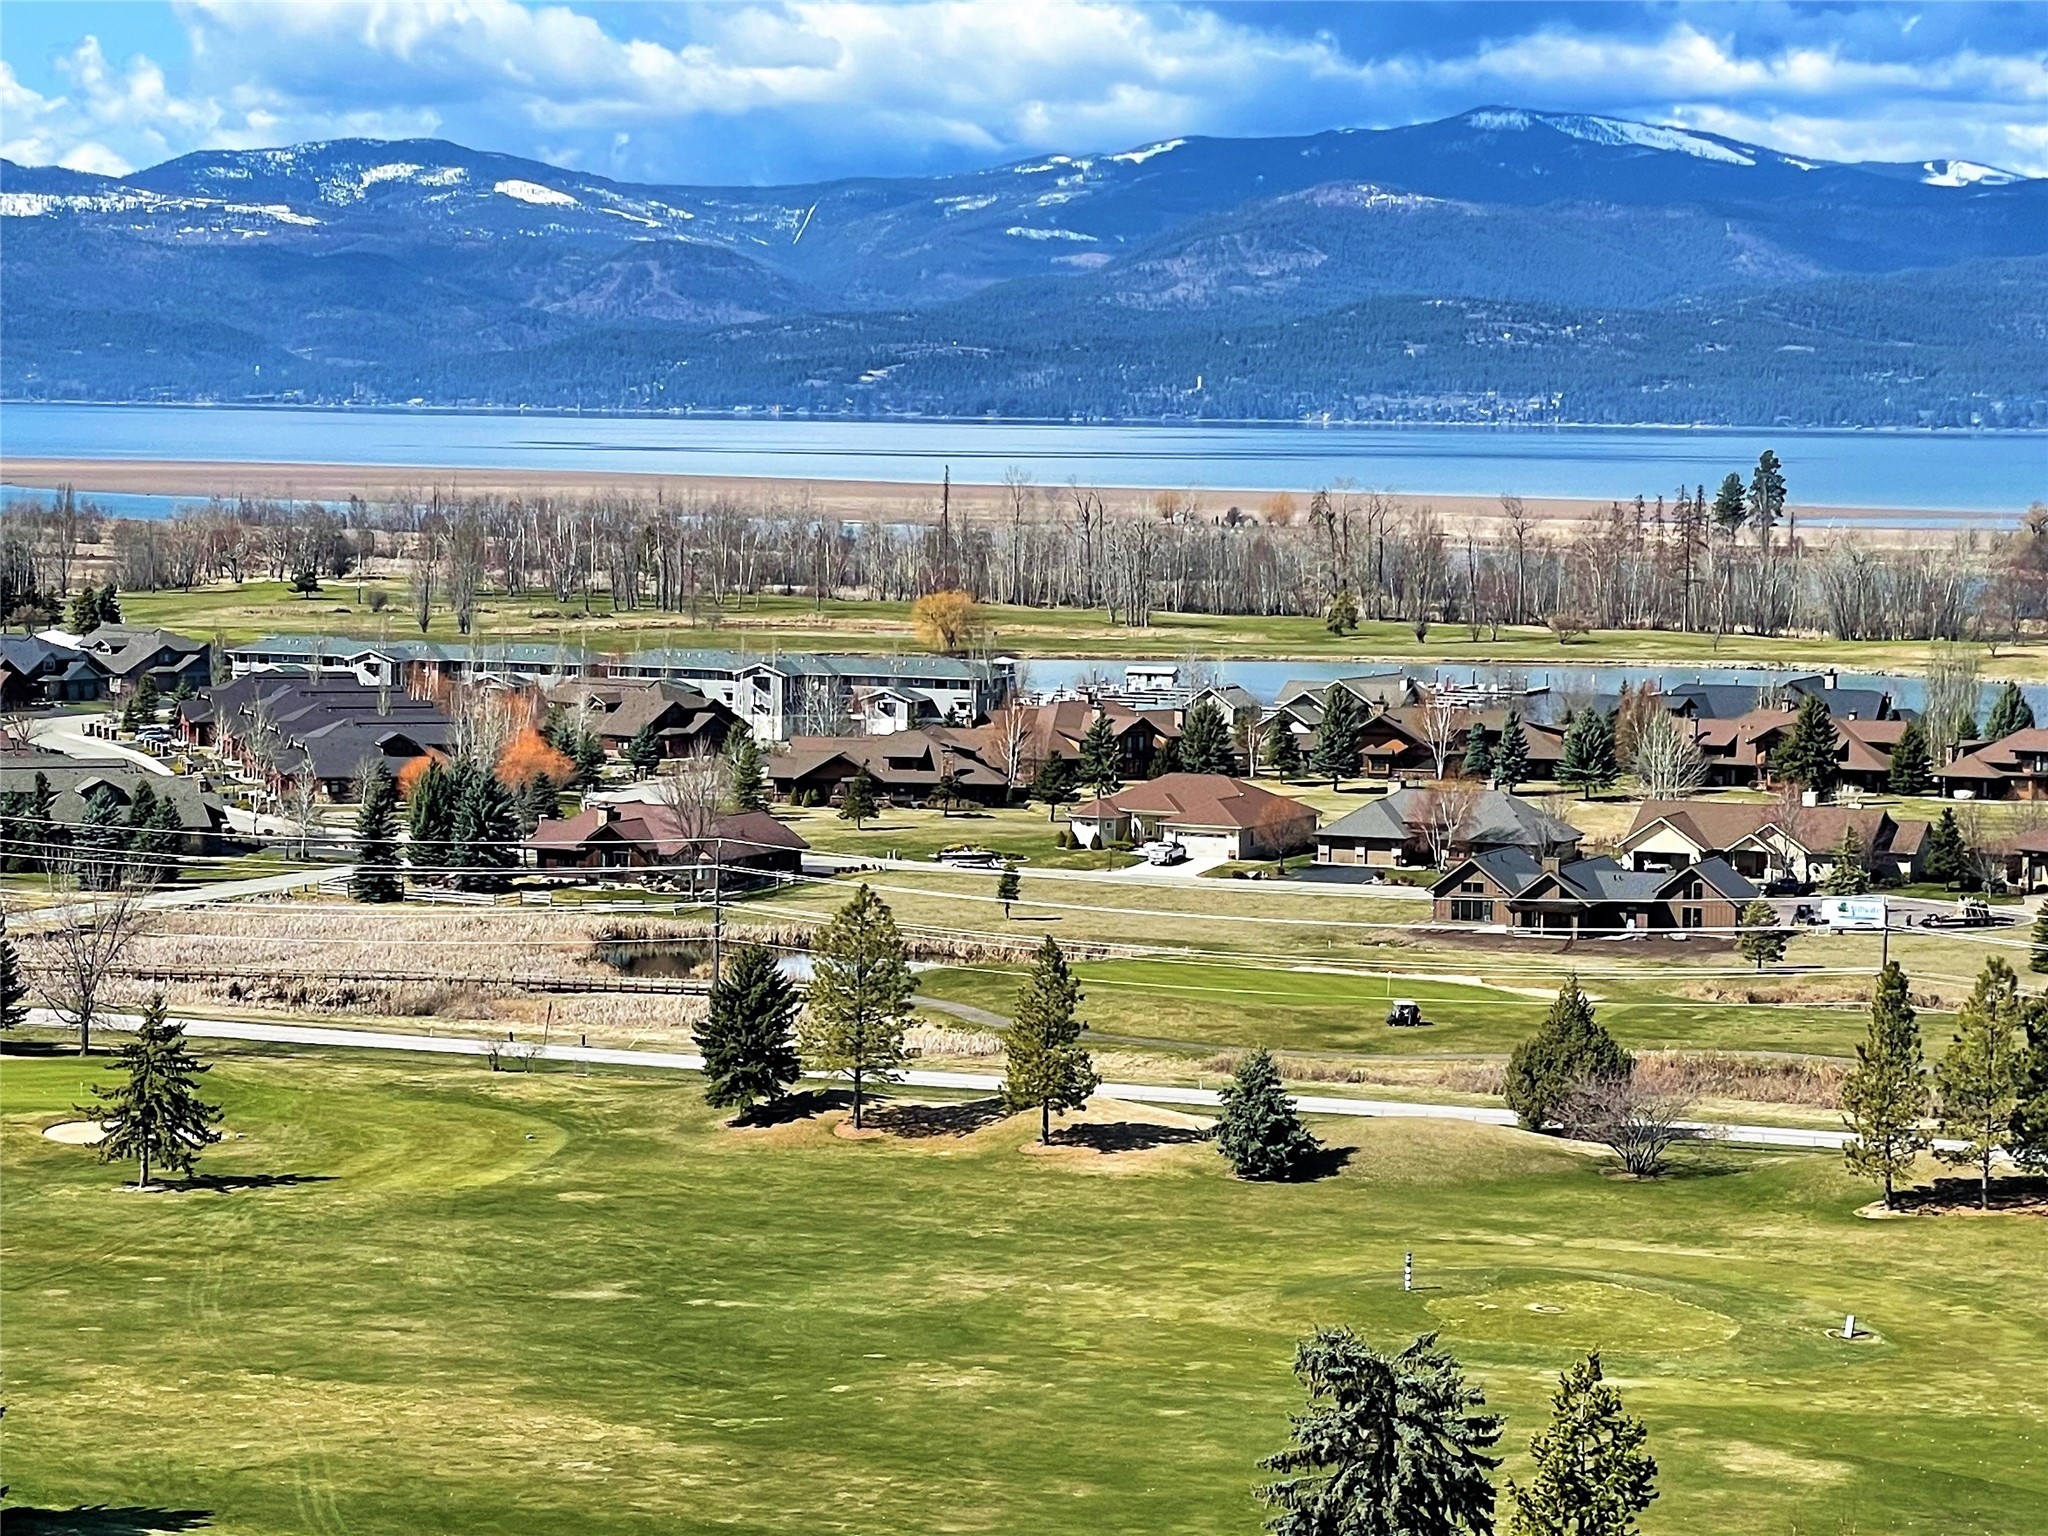 Remarks: Highly useable level lot in beautiful Eagle Bend community. This lot is on a cul-de-sac with mountain views and backs up to Eagle Bend Golf Course. Within walking distance to the Montana Athletic Club, Eagle Bend Yacht Harbor, Flathead Lake, and Club House. Approximately 2 miles to downtown Bigfork. Eagle Bend Golf Club is a 27-hole championship course located on the north end of Flathead Lake where the Flathead River enters the lake. Approximately 52 miles to the west entrance of Glacier National Park and 26 miles to Glacier Park International Airport. Call Cory Richmond at 406-249-2537 or Bret Richmond 406-210-0230, or your real estate professional.